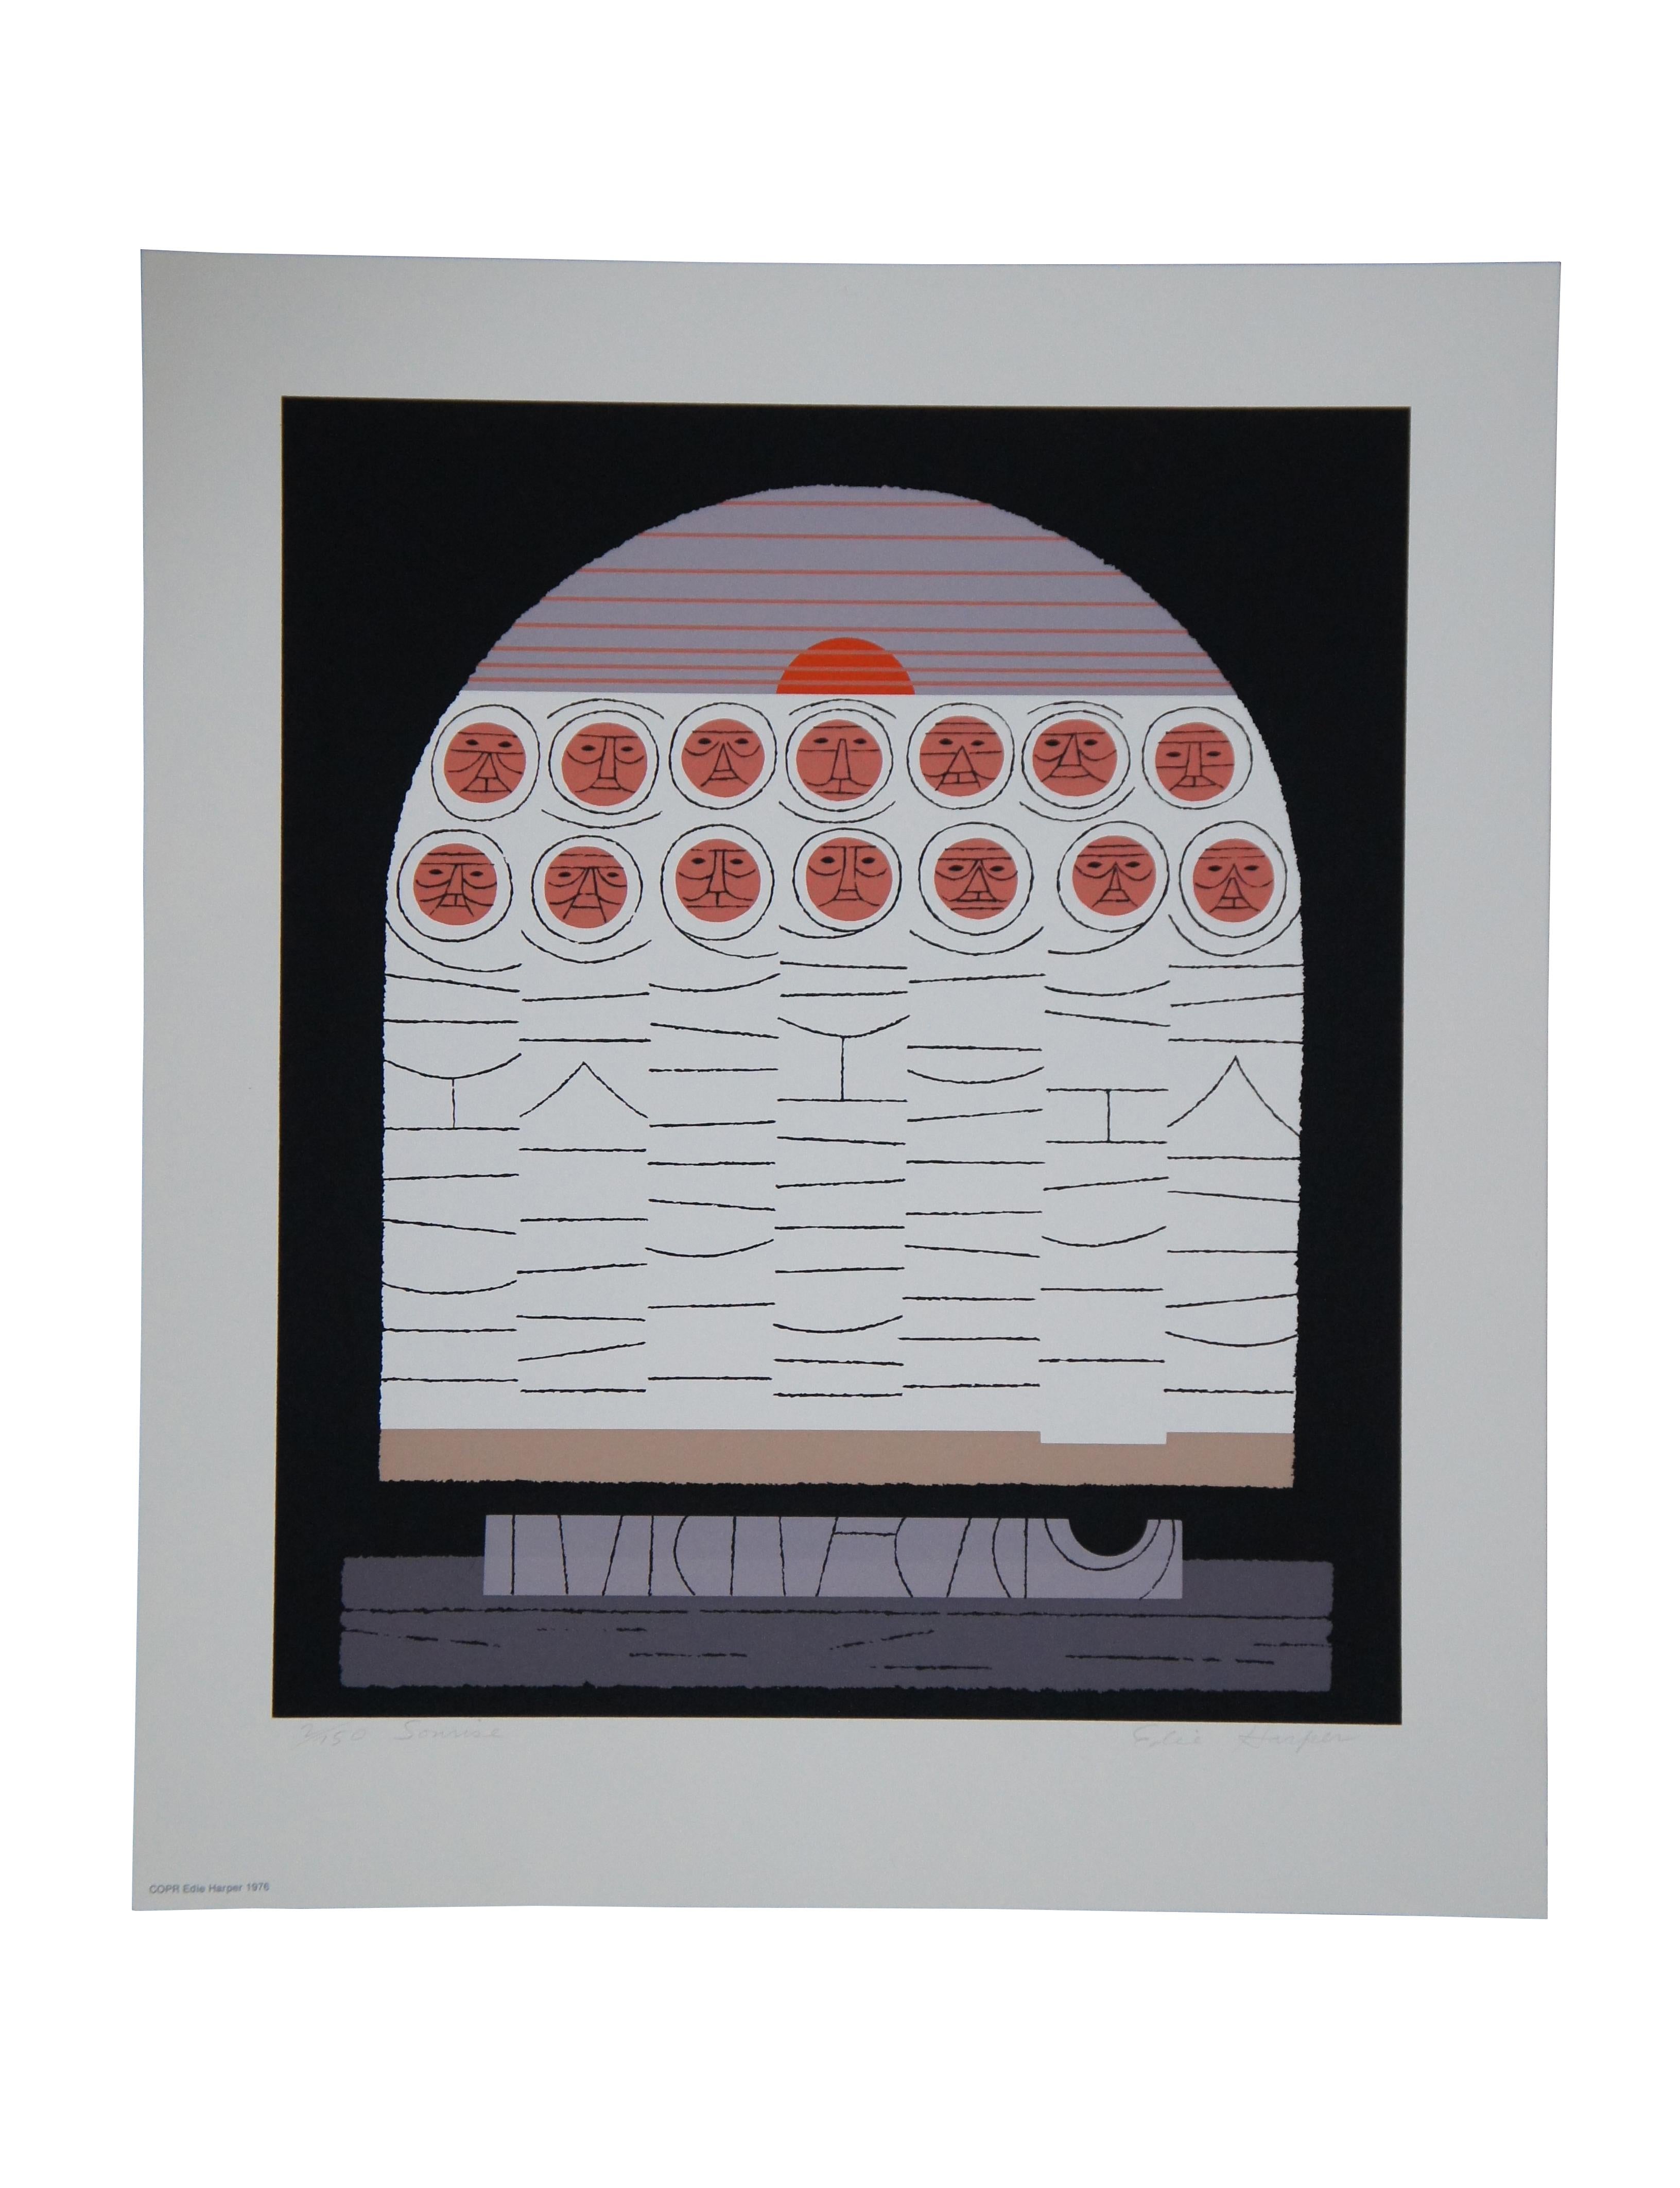 Vintage 1976 Frame House Gallery Limited Edition Collector Print of Sonrise by Edie Harper,  showing the Biblical scene of a group of figures observing the empty tomb of Jesus as the sun rises behind them. Serigraph on paper. Pencil signed and